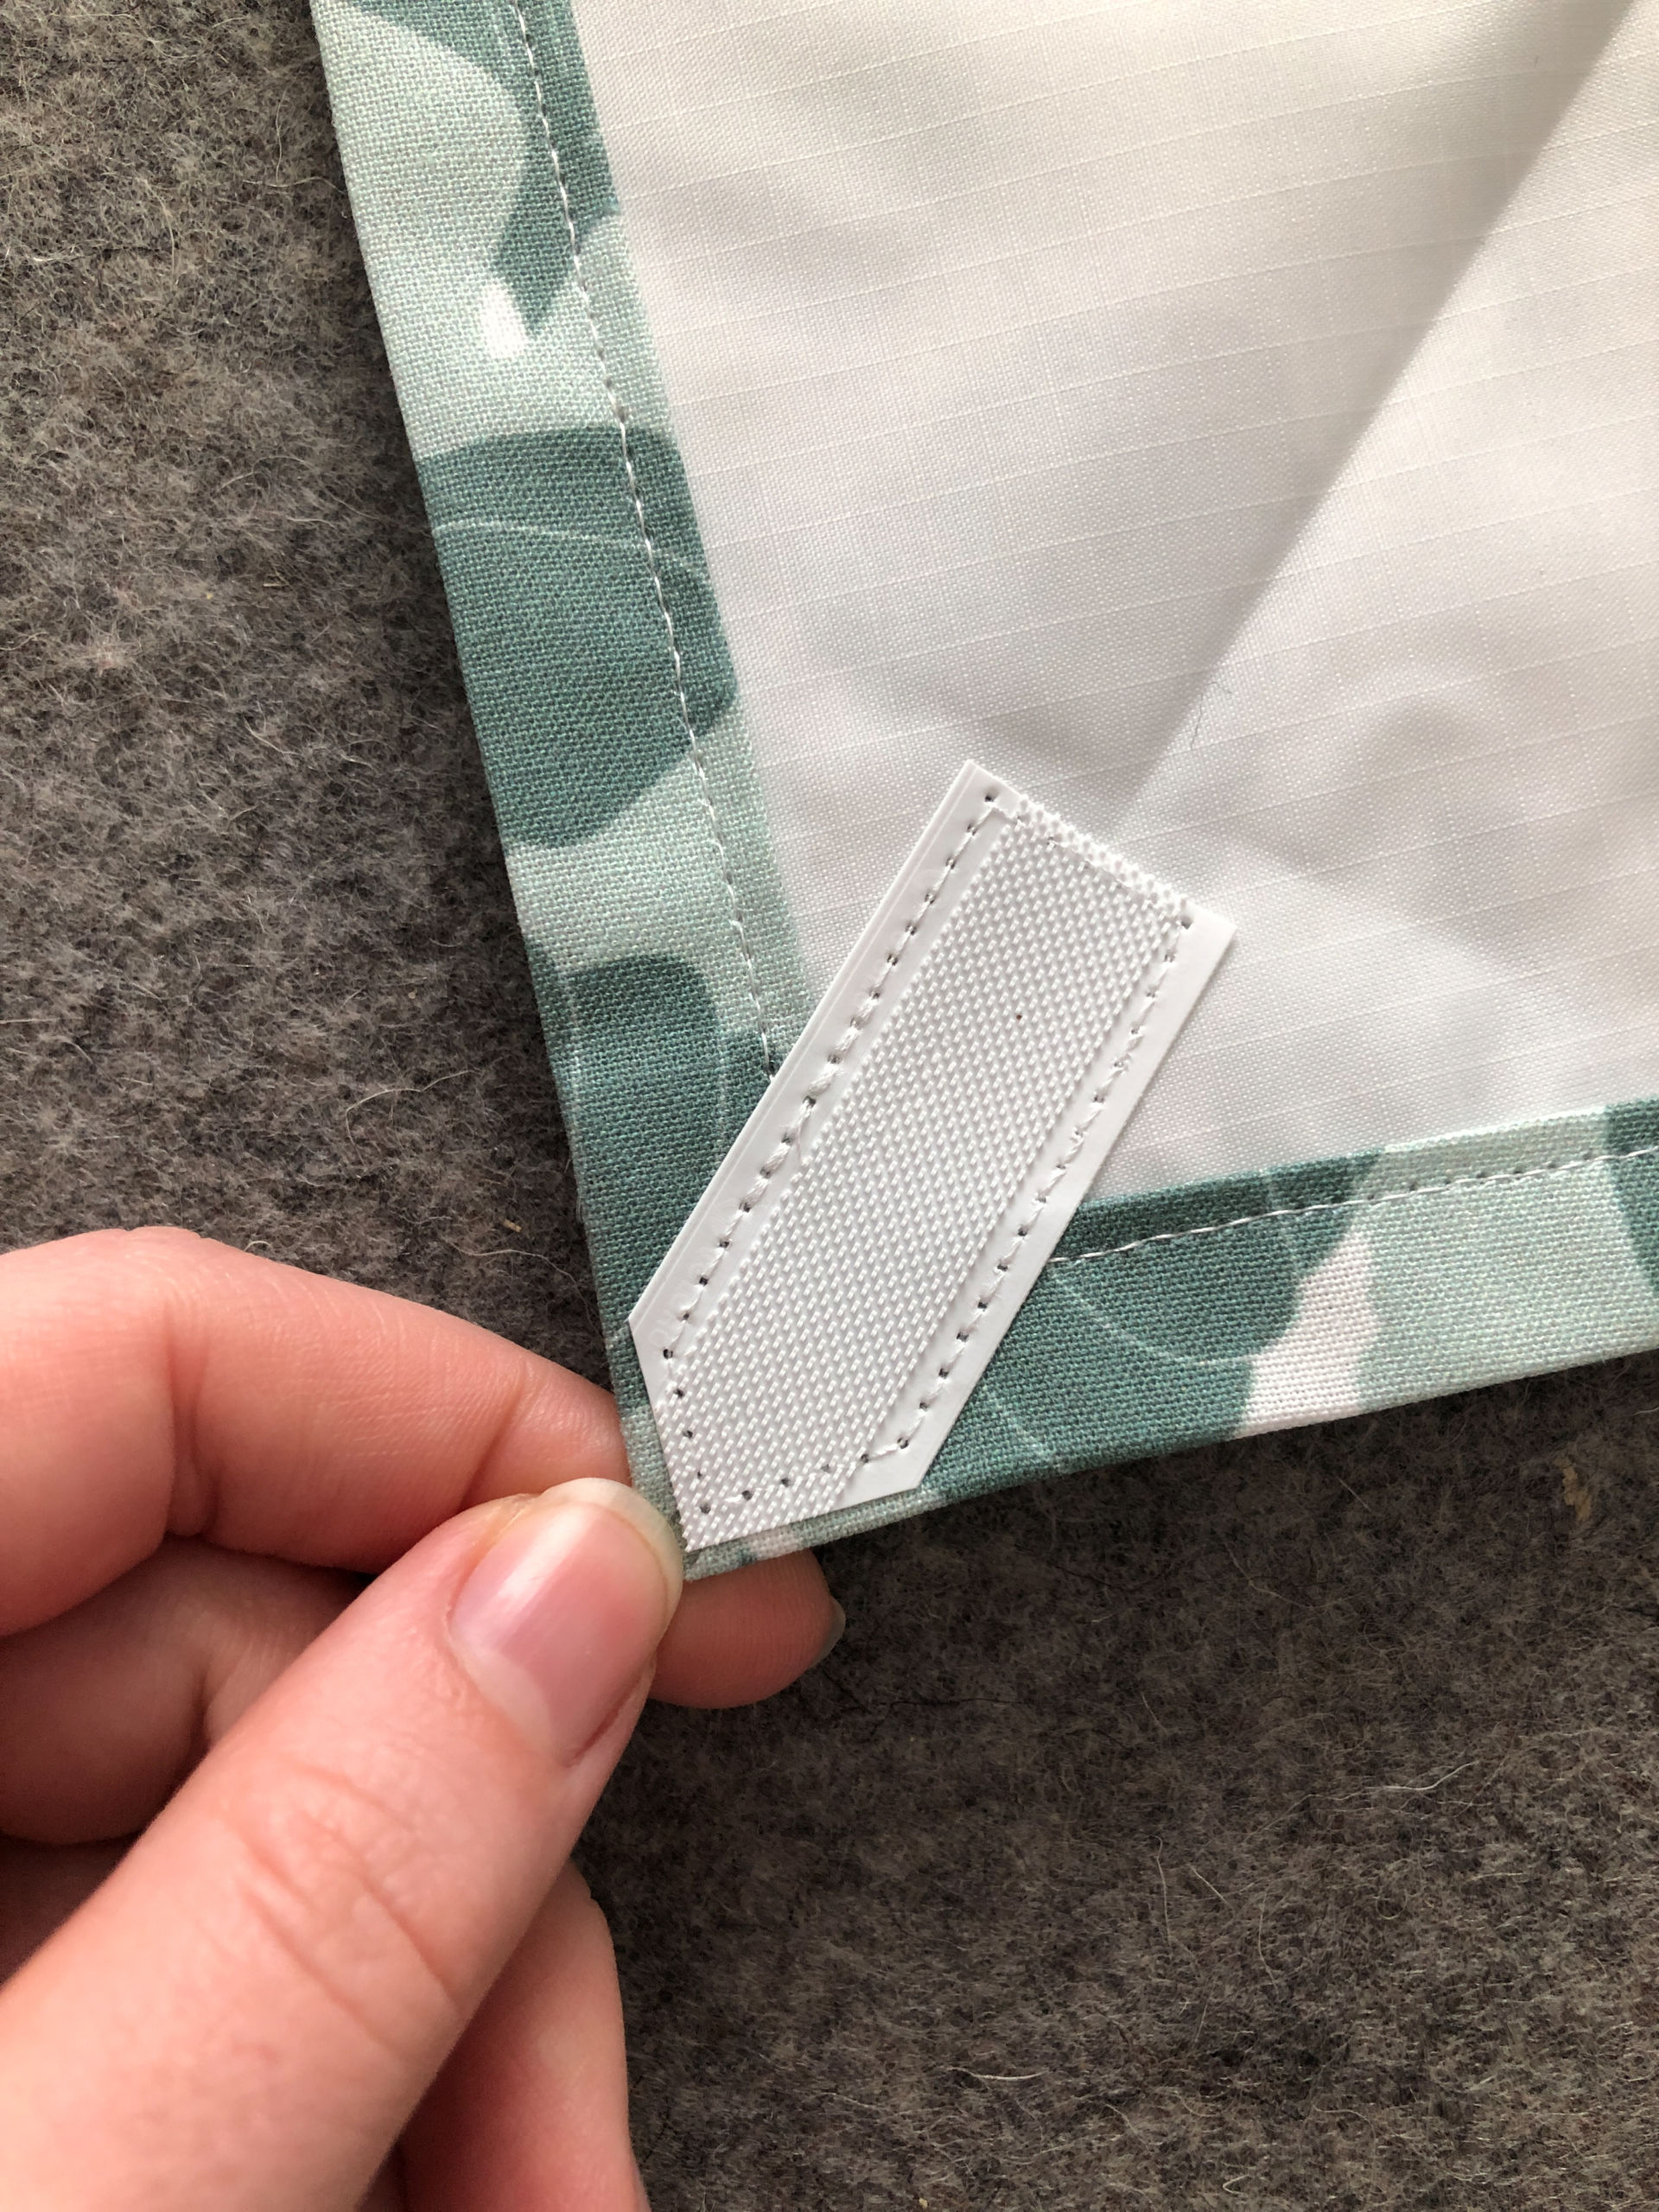 Add an easy homemade touch to your picnic or lunch with this DIY reusable sandwich wrap tutorial. This step by step photo tutorial shows you how to sew your own reusable sandwich wrap out of fabric that can be washed and used every day. suzyquilts.com #quilting #sewingdiy